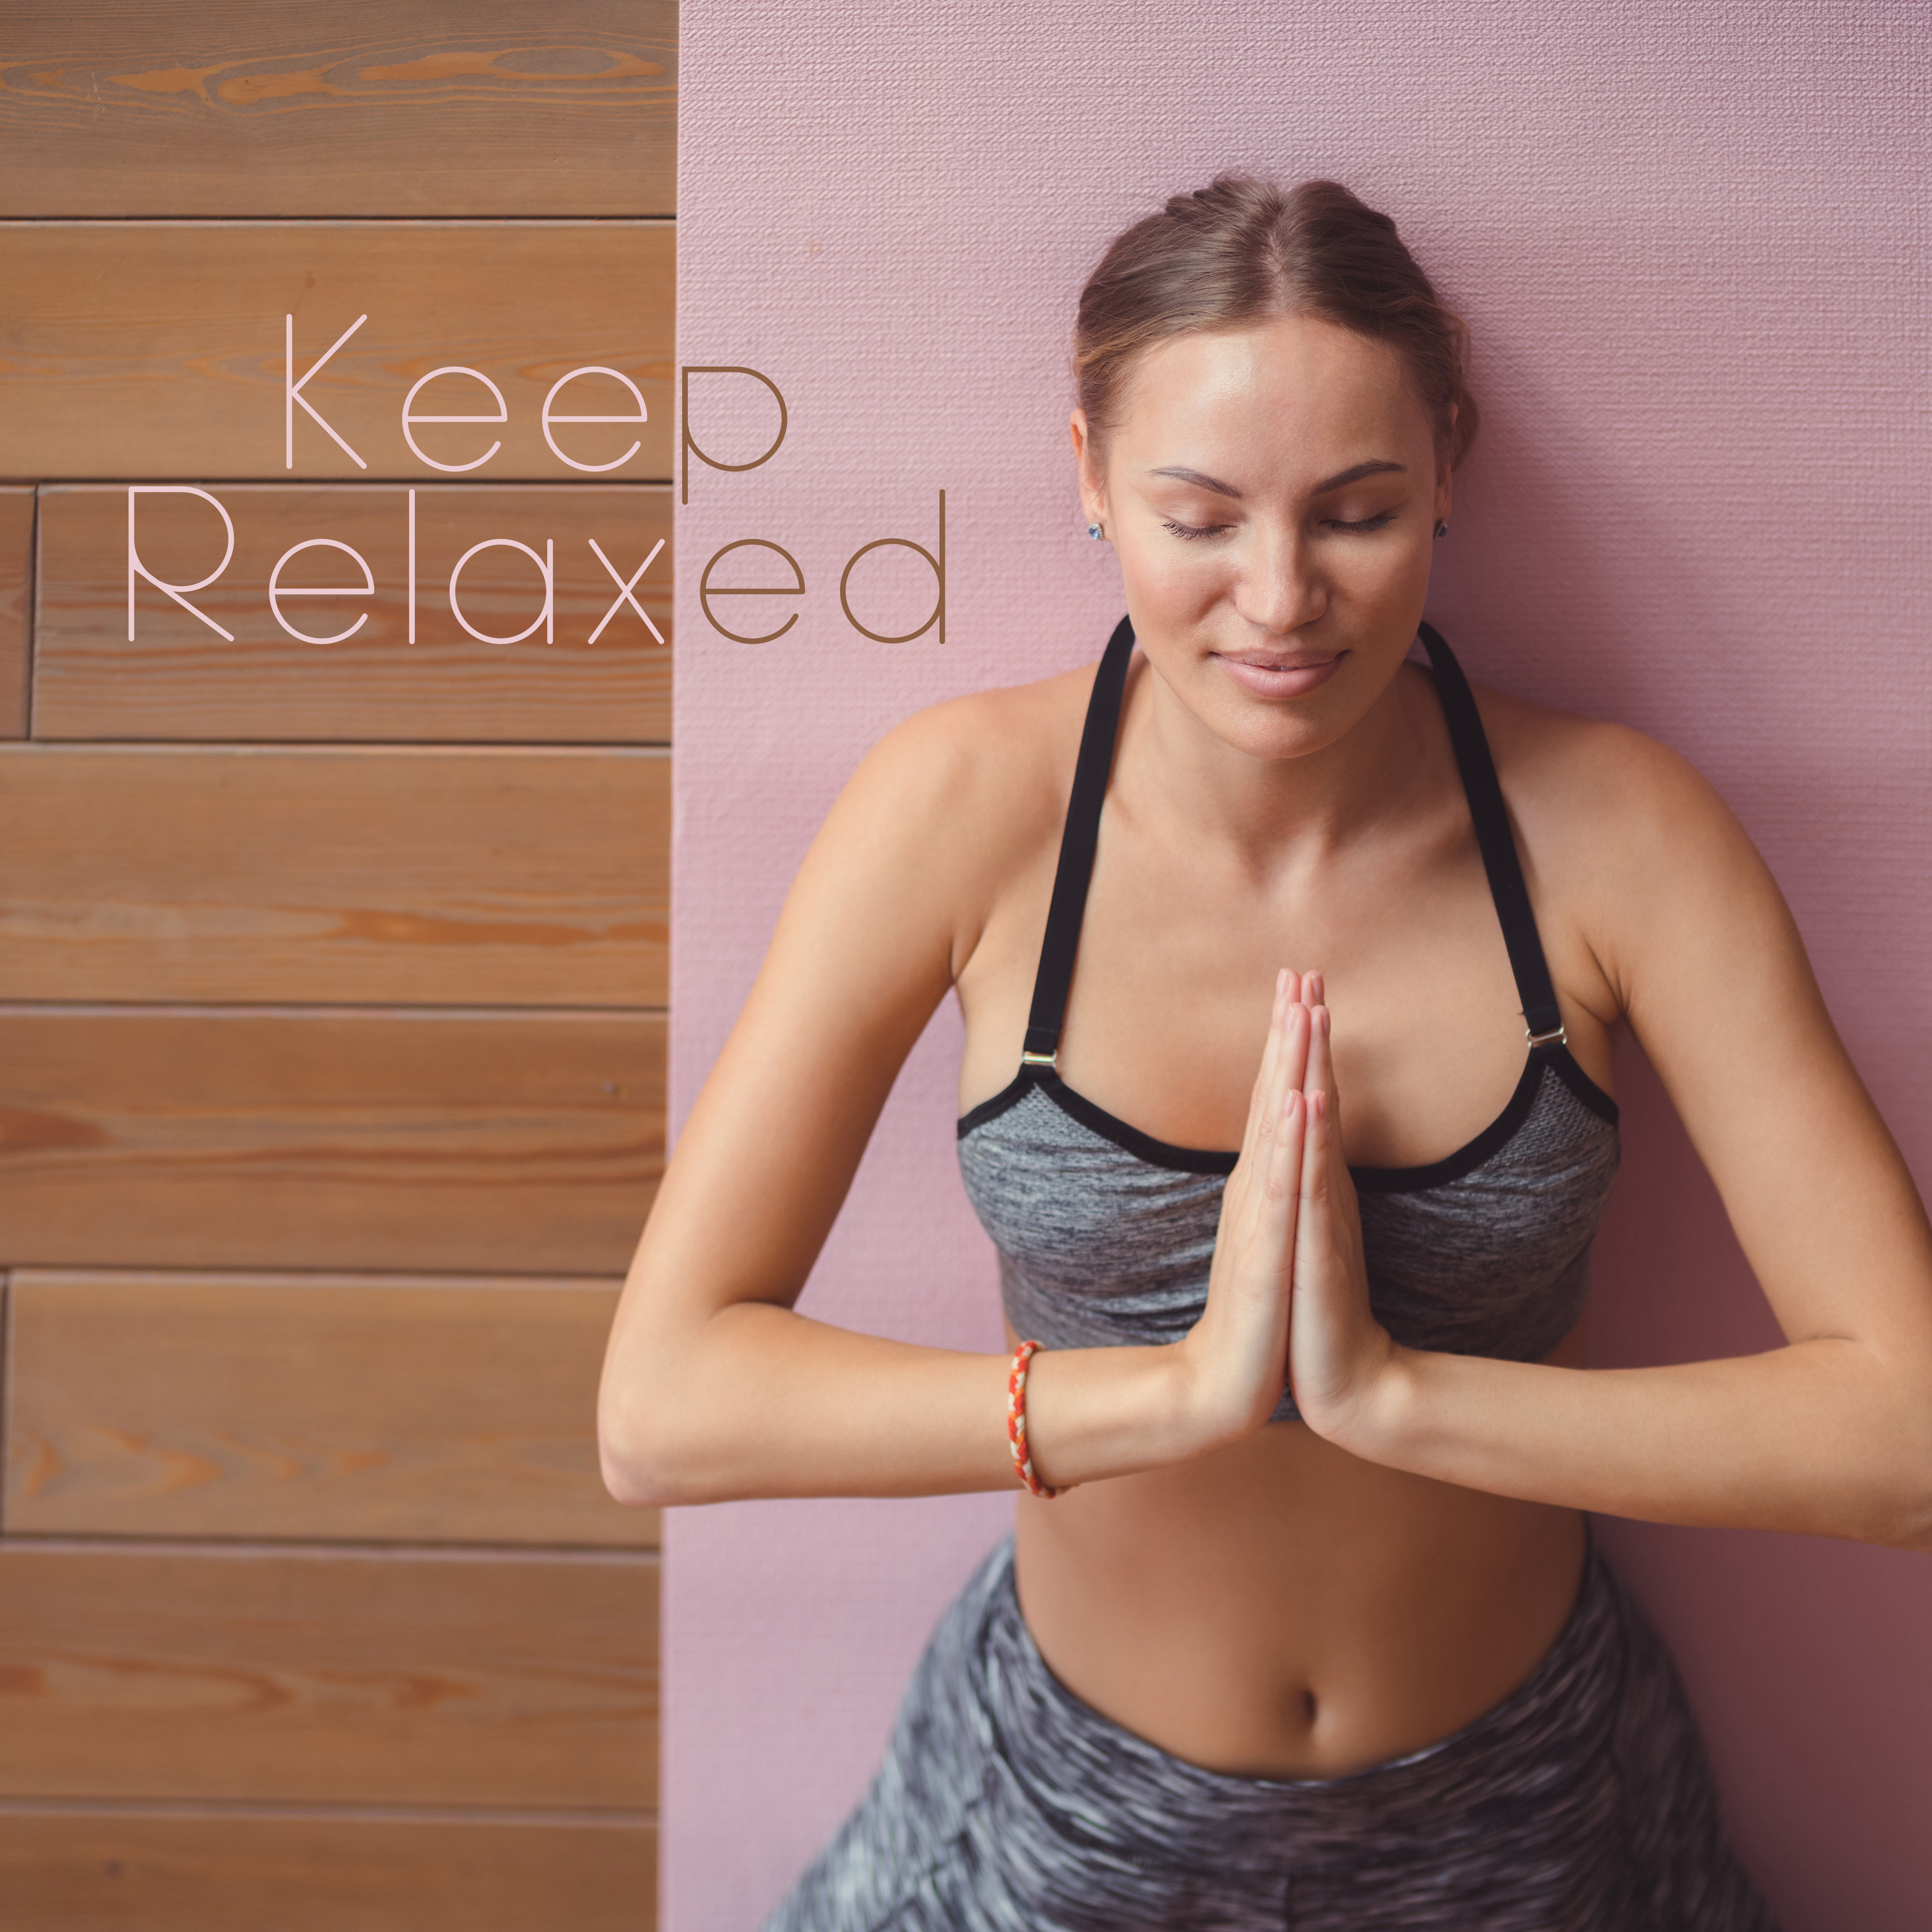 Keep Relaxed  Meditation Therapy 2019, Relax Zone, Perfect Contemplation, Soothing Meditation for Yoga, Sleep, Deep Meditation, Chakra Balancing